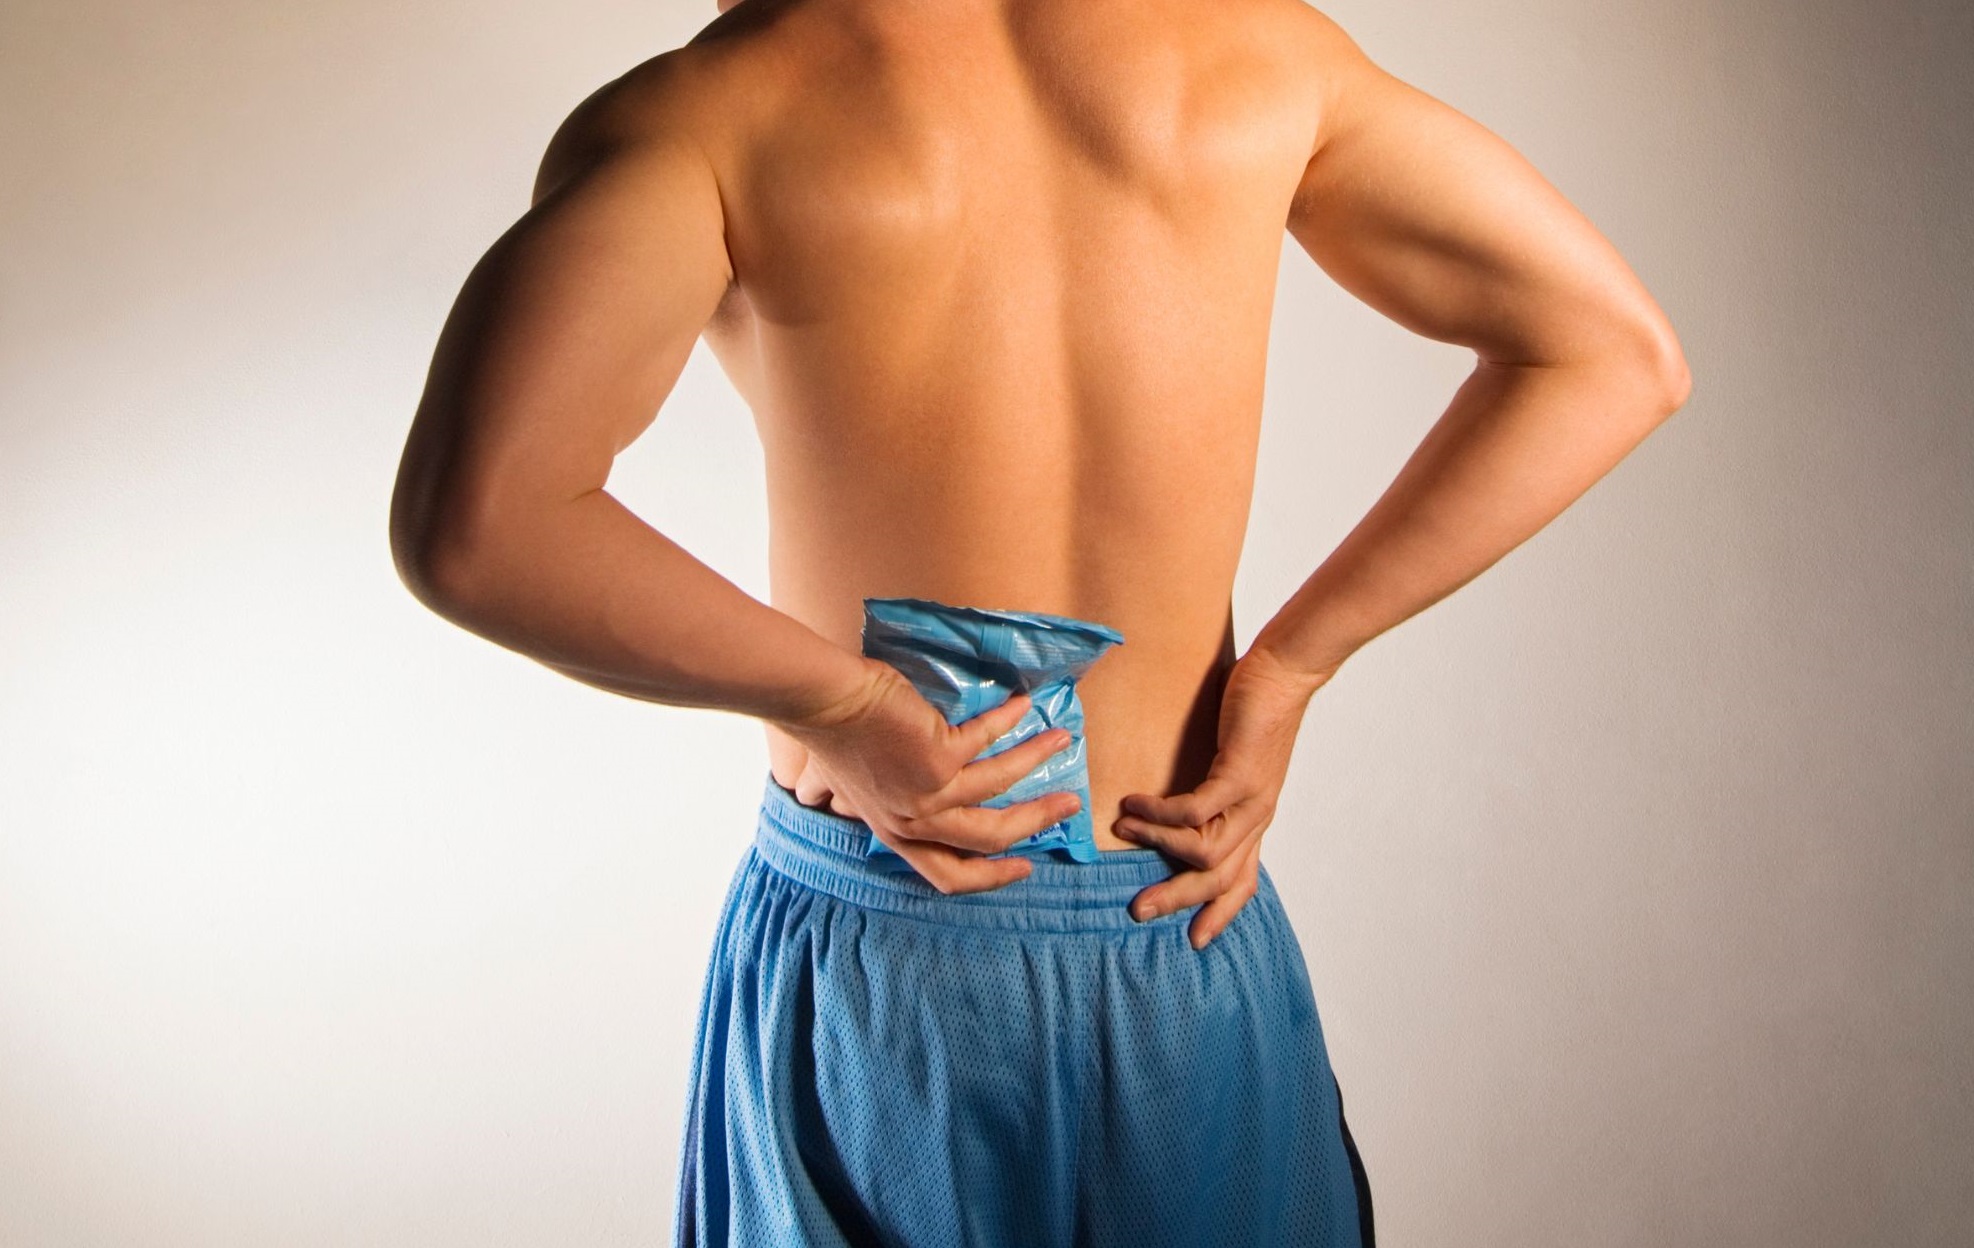 Man Using Ice Pack For Back Pain Relief